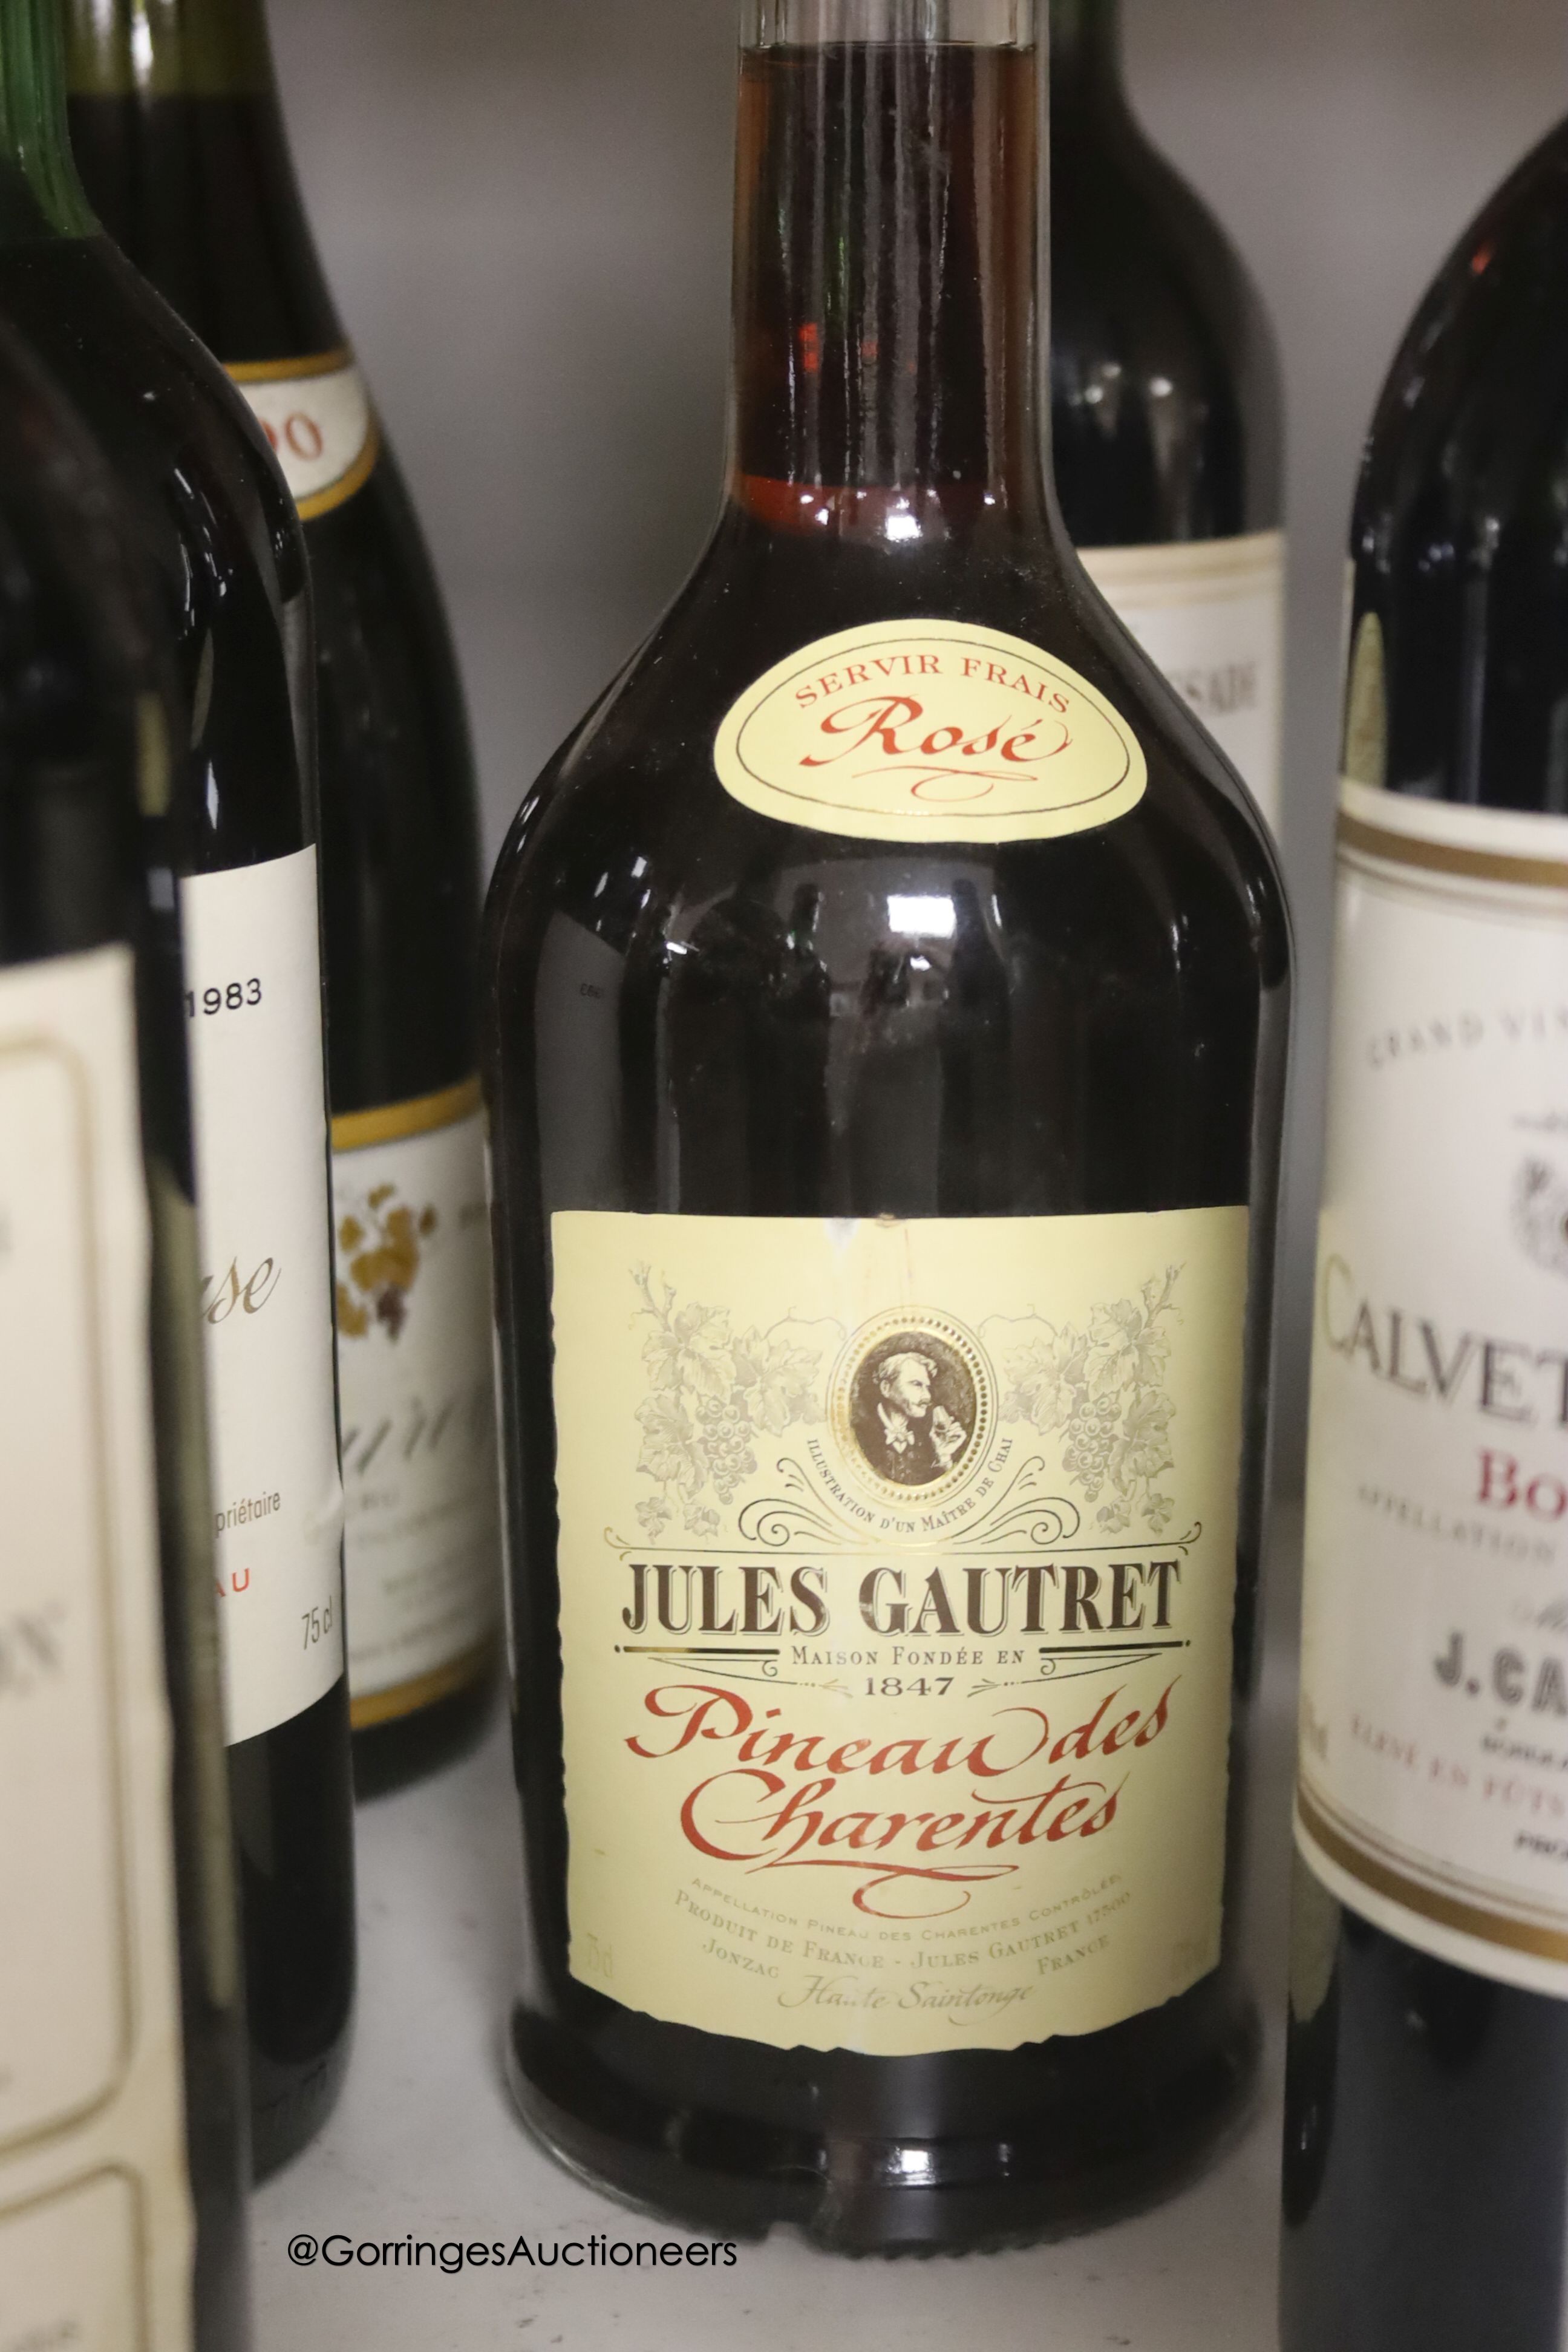 Sixteen assorted red wines including five bottles of Les Couronnes, Saint Emilion Grand Cru 1979